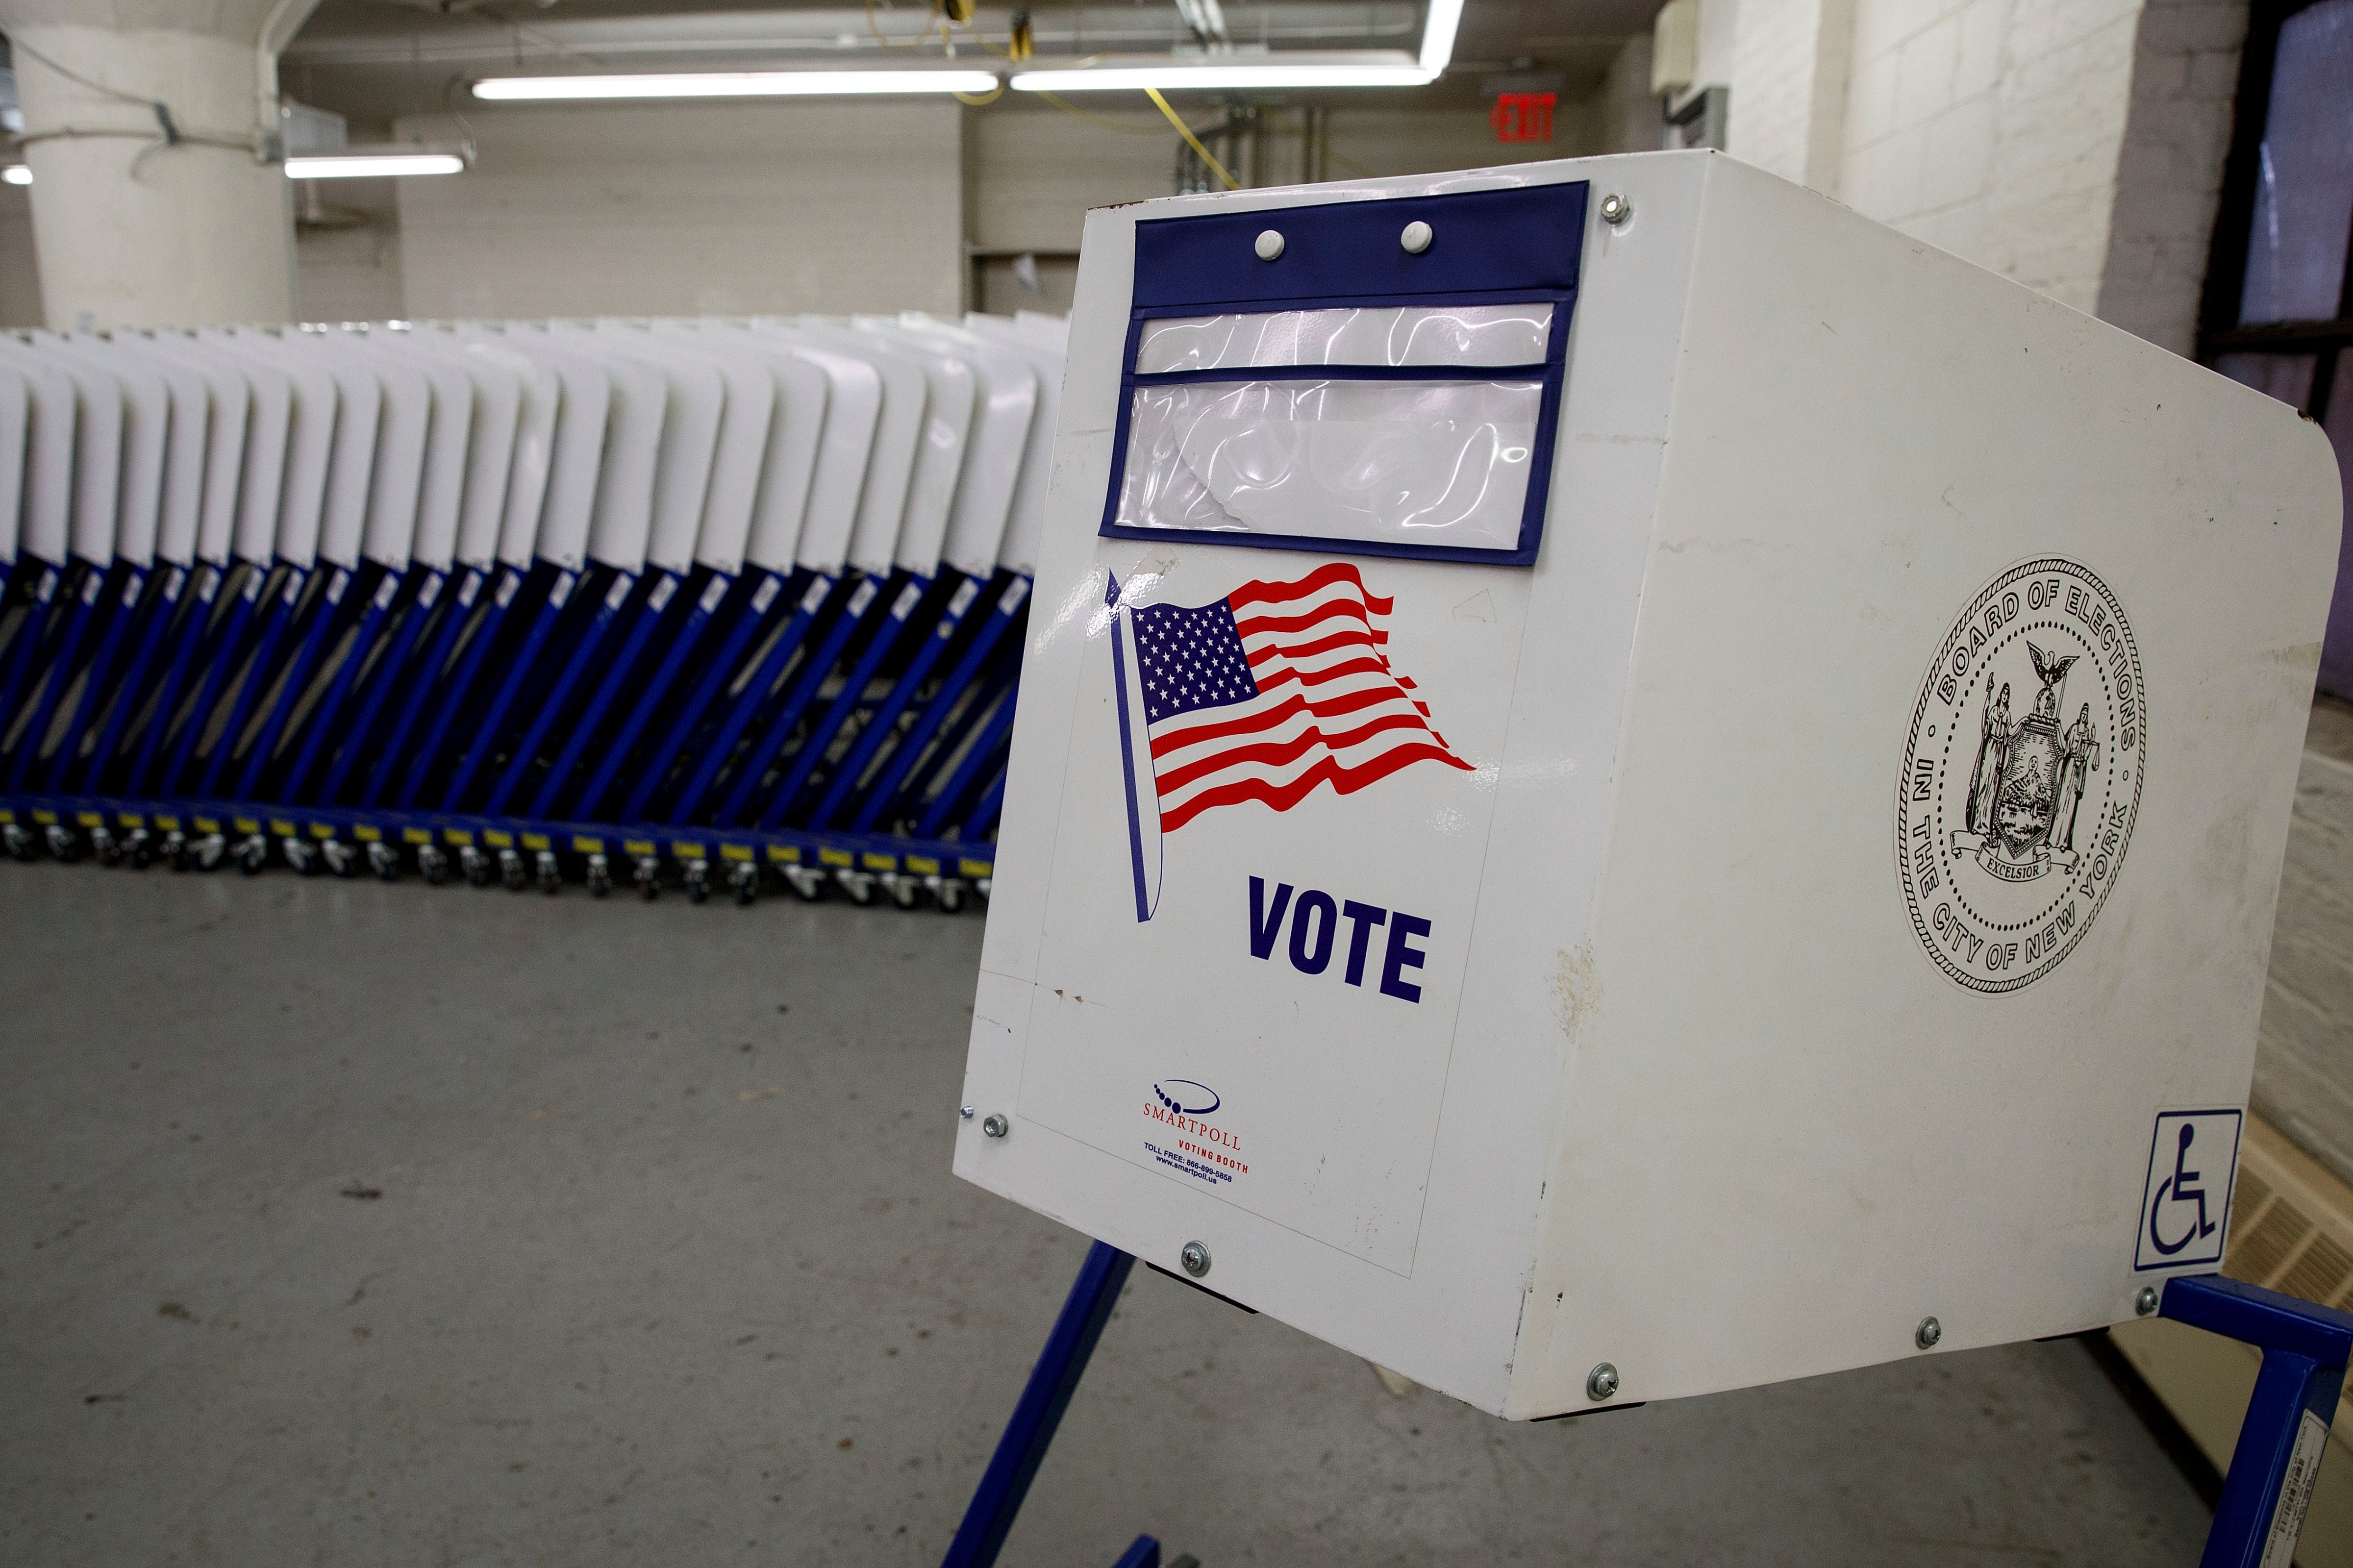 Voting booths sit at a New York City Board of Elections voting machine facility warehouse, November 3, 2016 in the Bronx borough in New York City. (Drew Angerer/Getty Images)